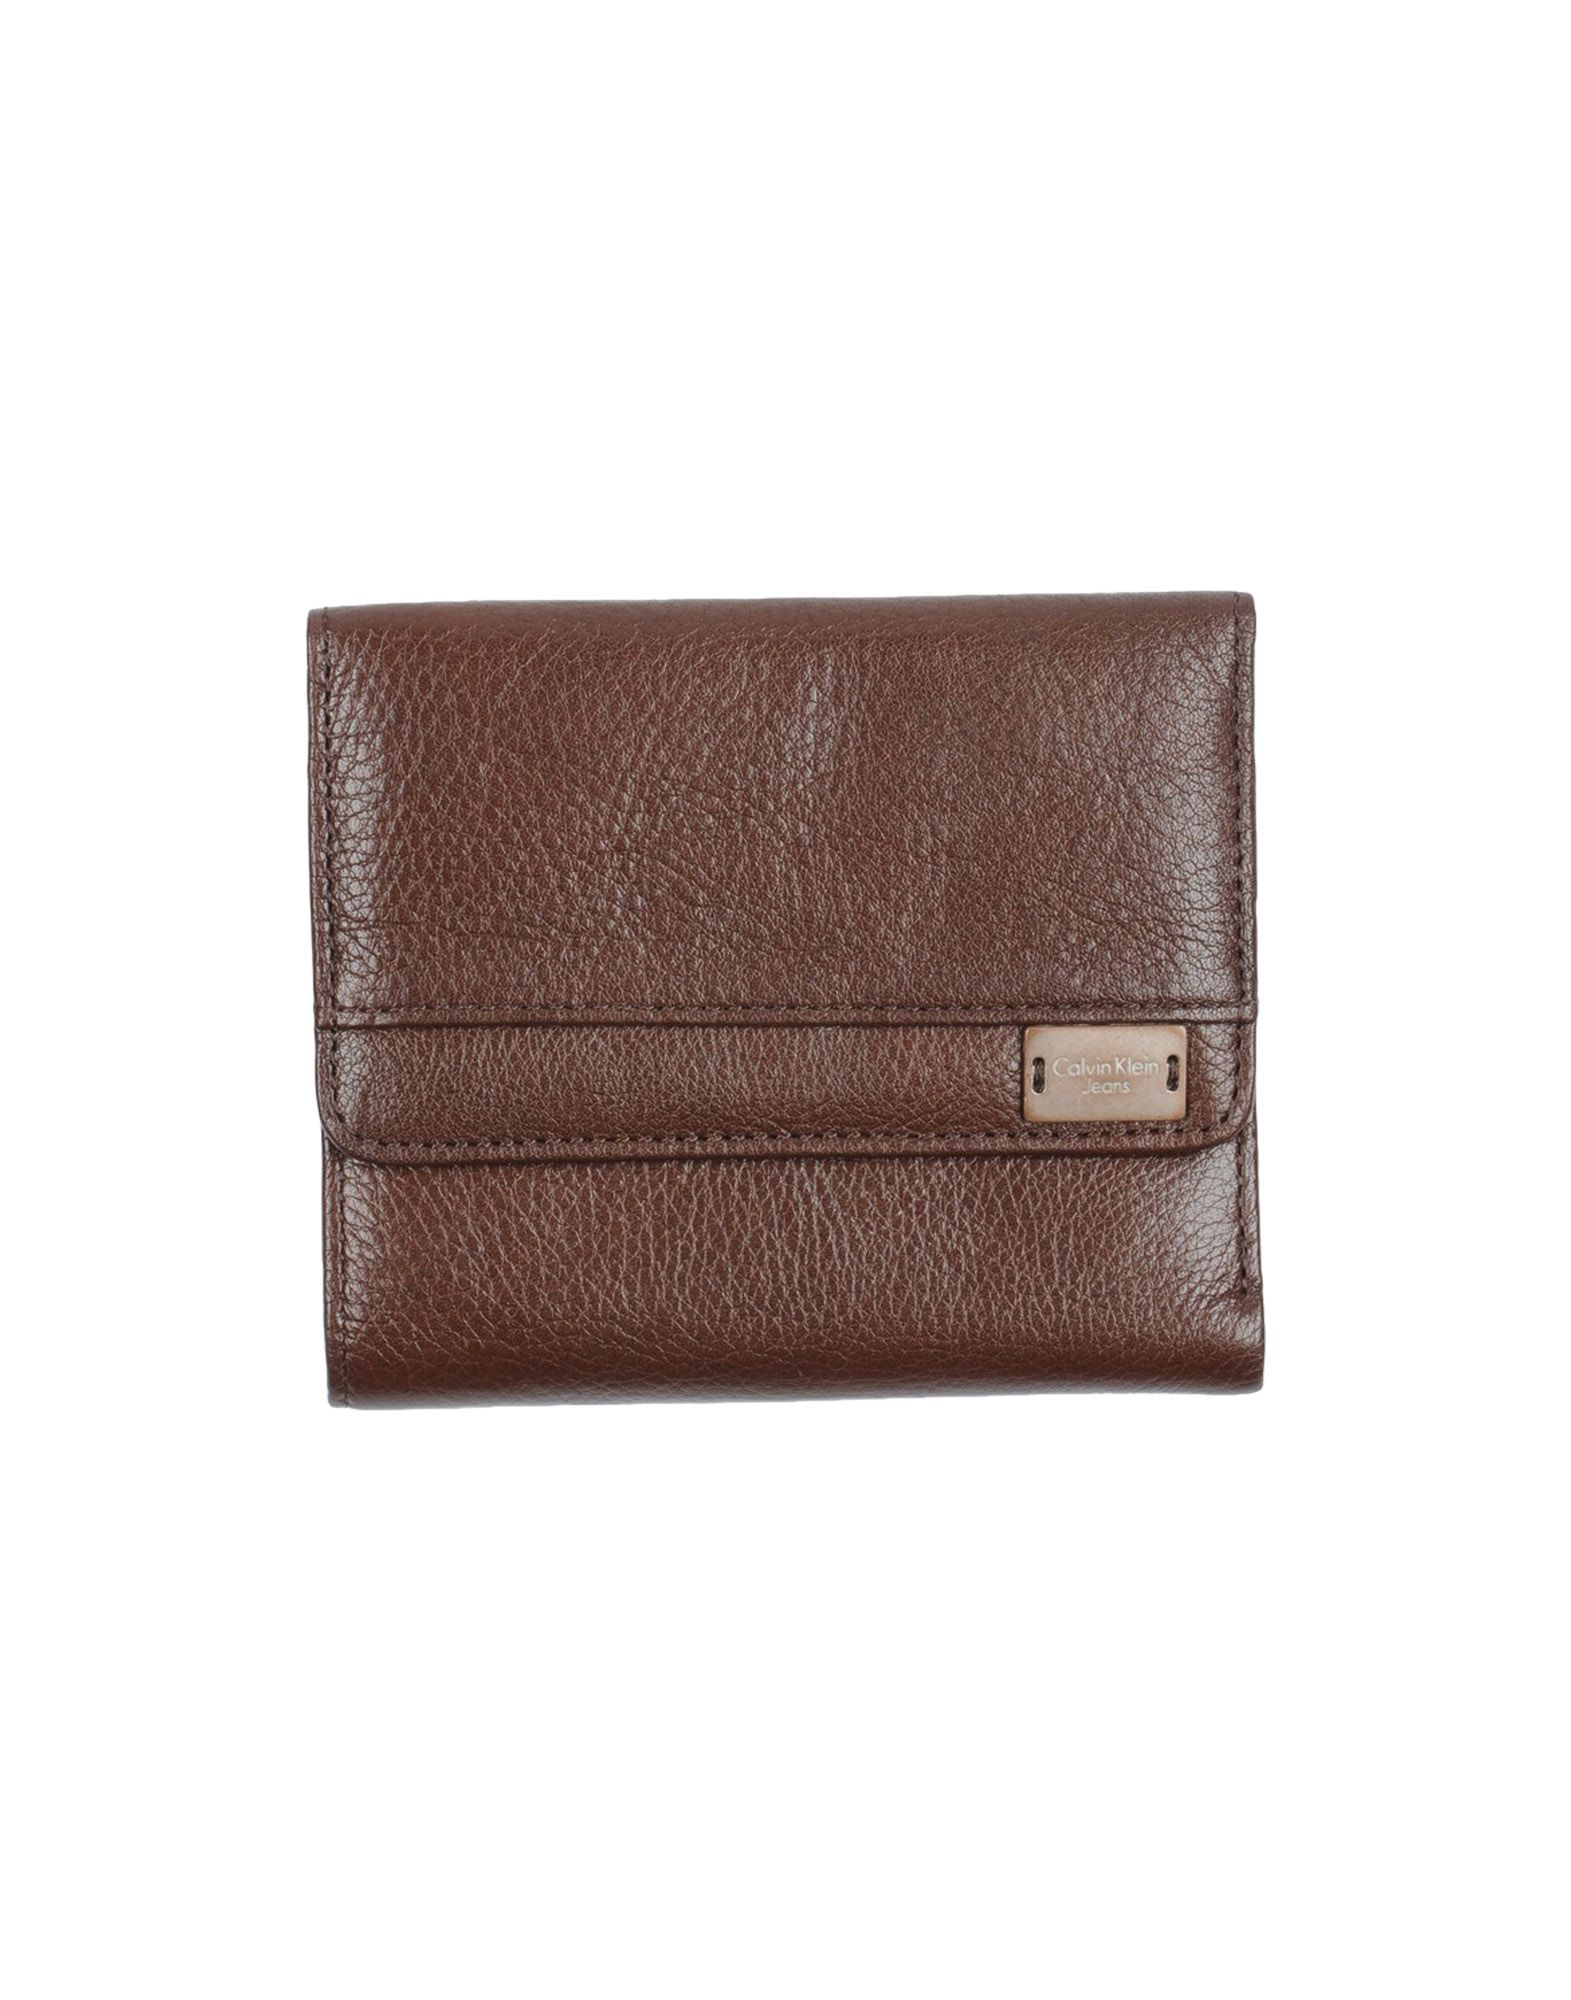 Calvin klein jeans Wallet in Brown for Men (Cocoa) | Lyst